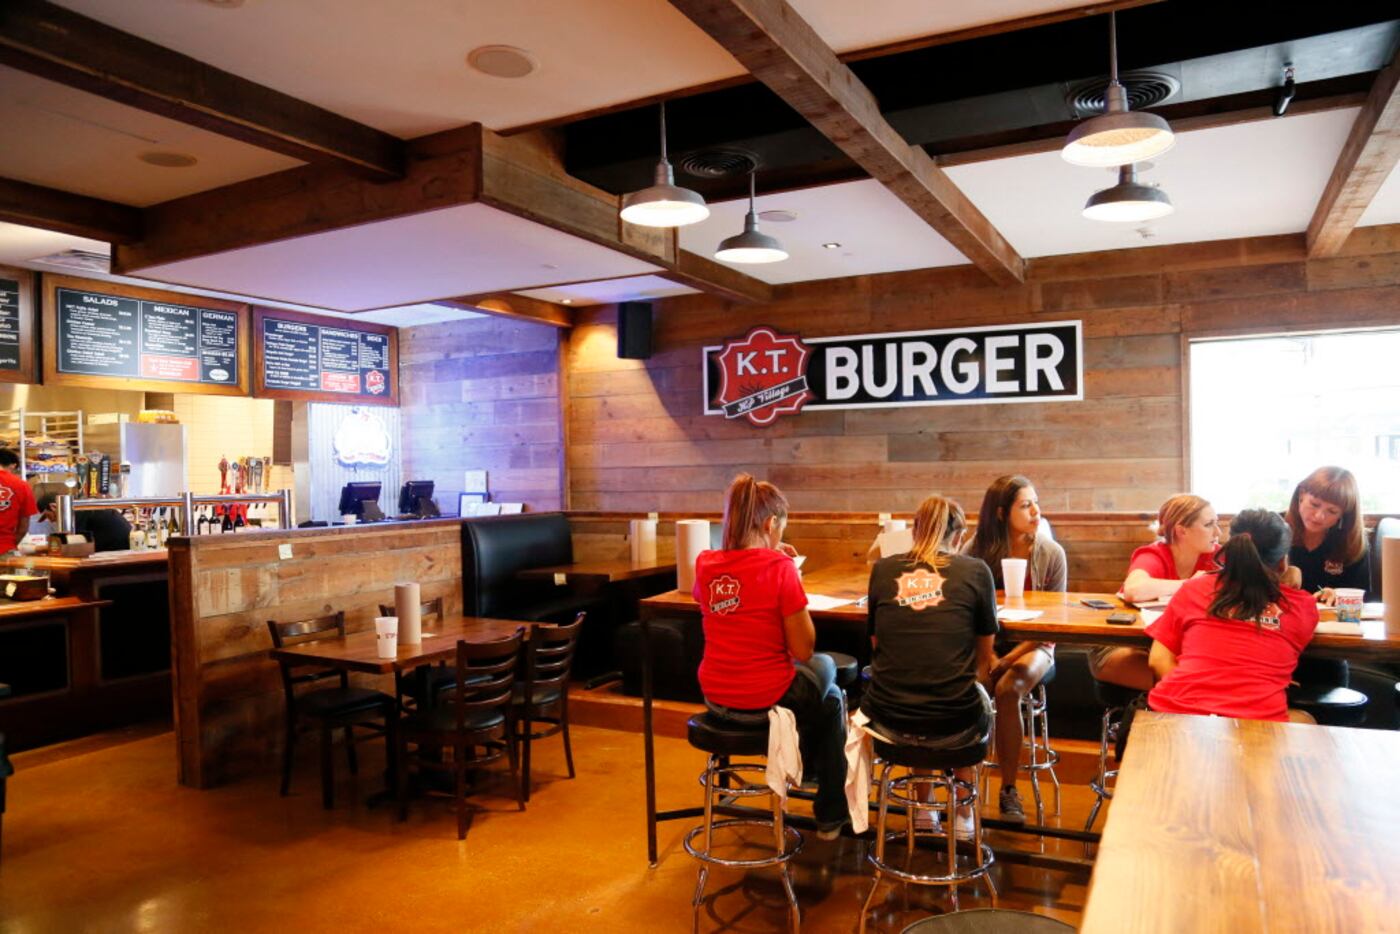 An interior view of a dining area at K.T. Burger